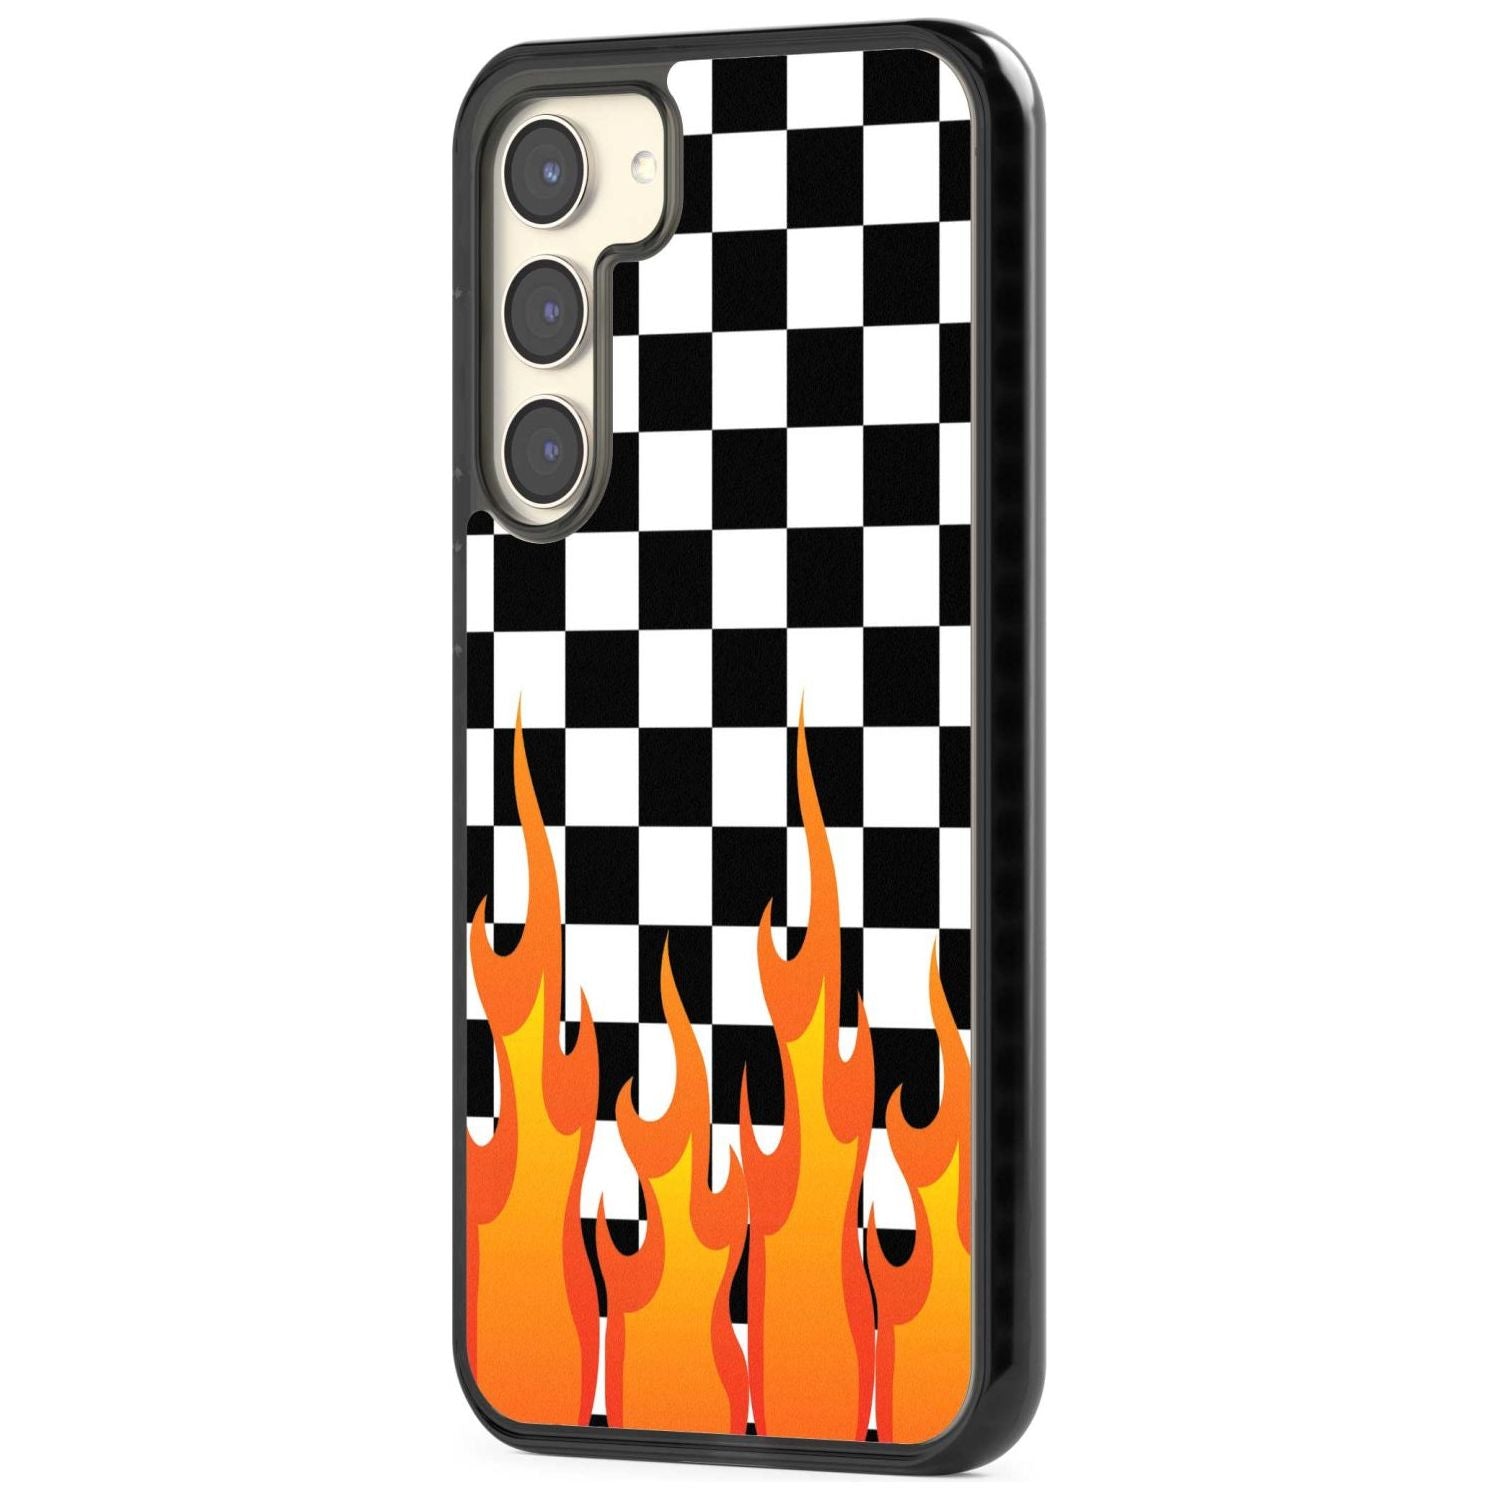 Checkered Fire Phone Case iPhone 15 Pro Max / Black Impact Case,iPhone 15 Plus / Black Impact Case,iPhone 15 Pro / Black Impact Case,iPhone 15 / Black Impact Case,iPhone 15 Pro Max / Impact Case,iPhone 15 Plus / Impact Case,iPhone 15 Pro / Impact Case,iPhone 15 / Impact Case,iPhone 15 Pro Max / Magsafe Black Impact Case,iPhone 15 Plus / Magsafe Black Impact Case,iPhone 15 Pro / Magsafe Black Impact Case,iPhone 15 / Magsafe Black Impact Case,iPhone 14 Pro Max / Black Impact Case,iPhone 14 Plus / Black Impact